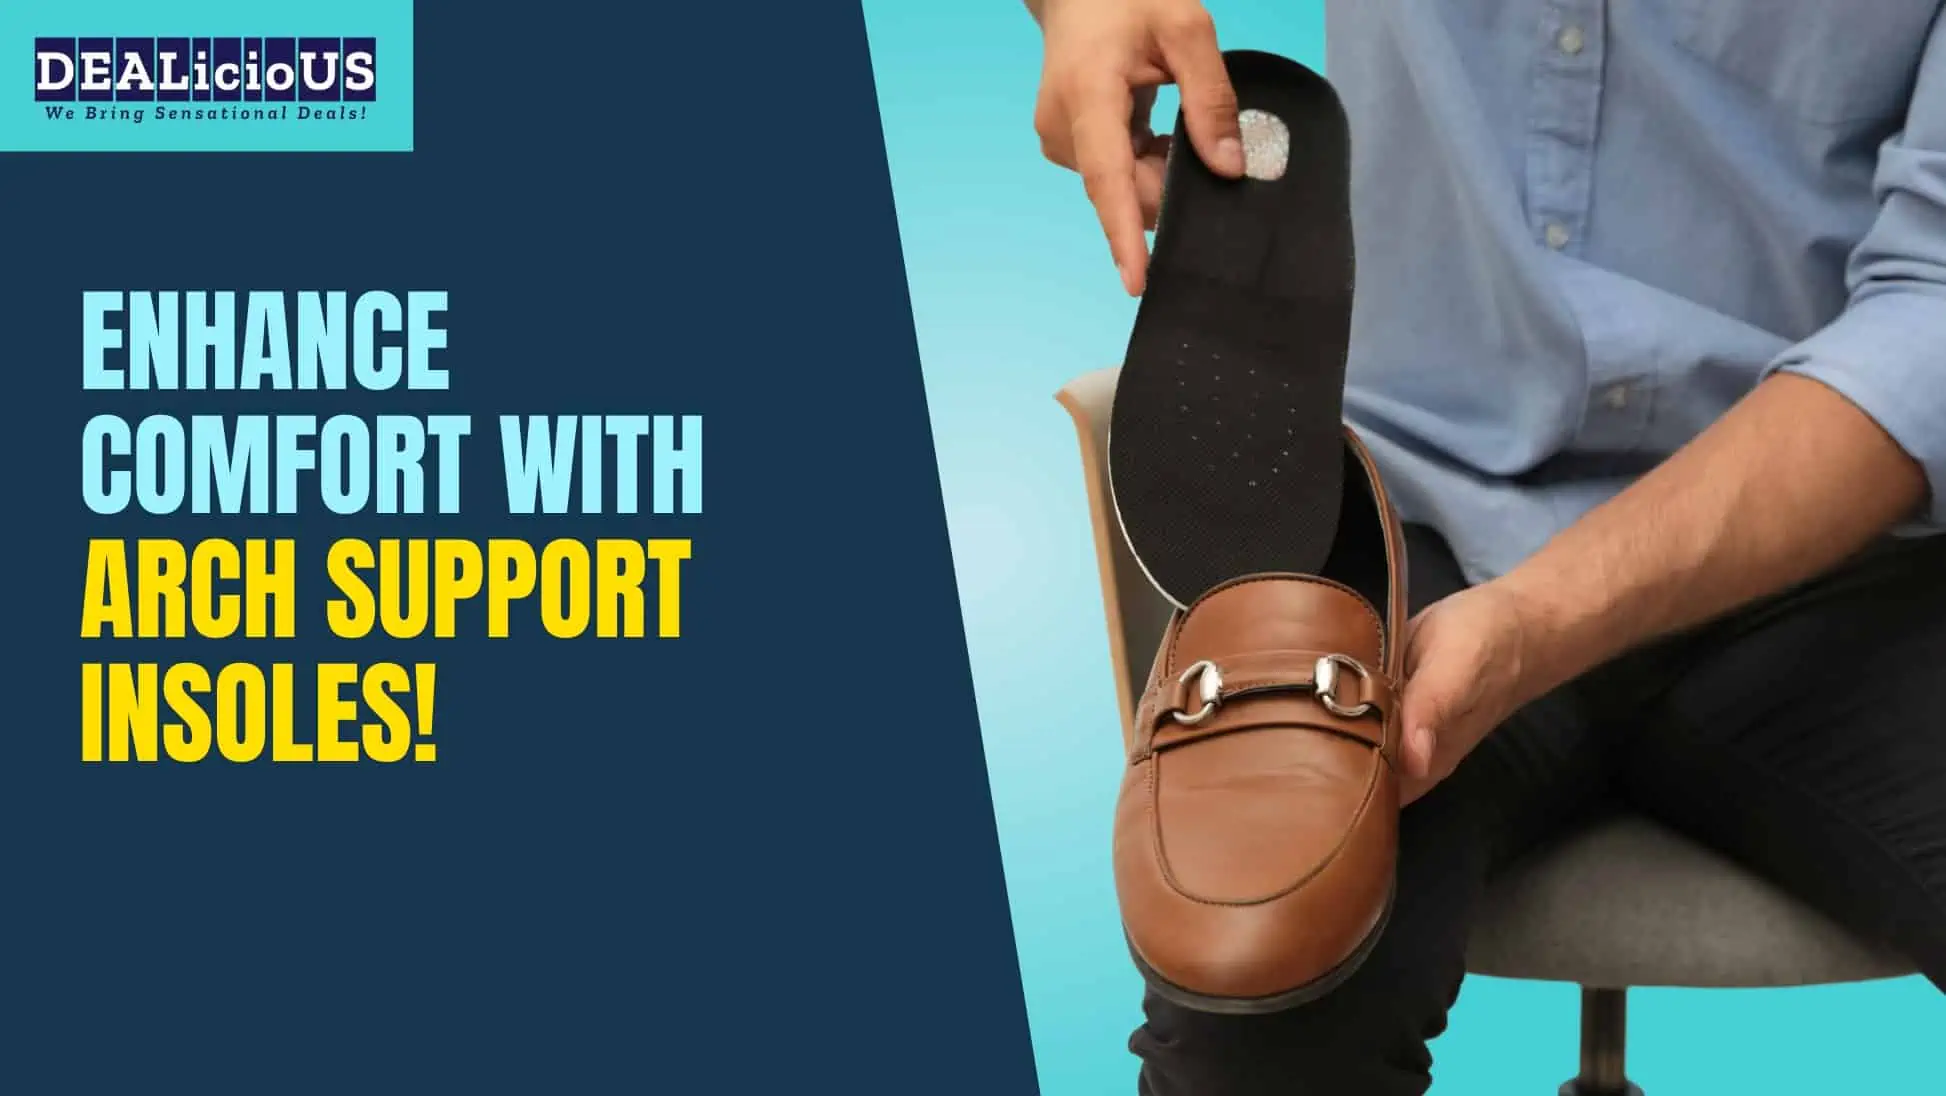 Enhance comfort with arch support insoles